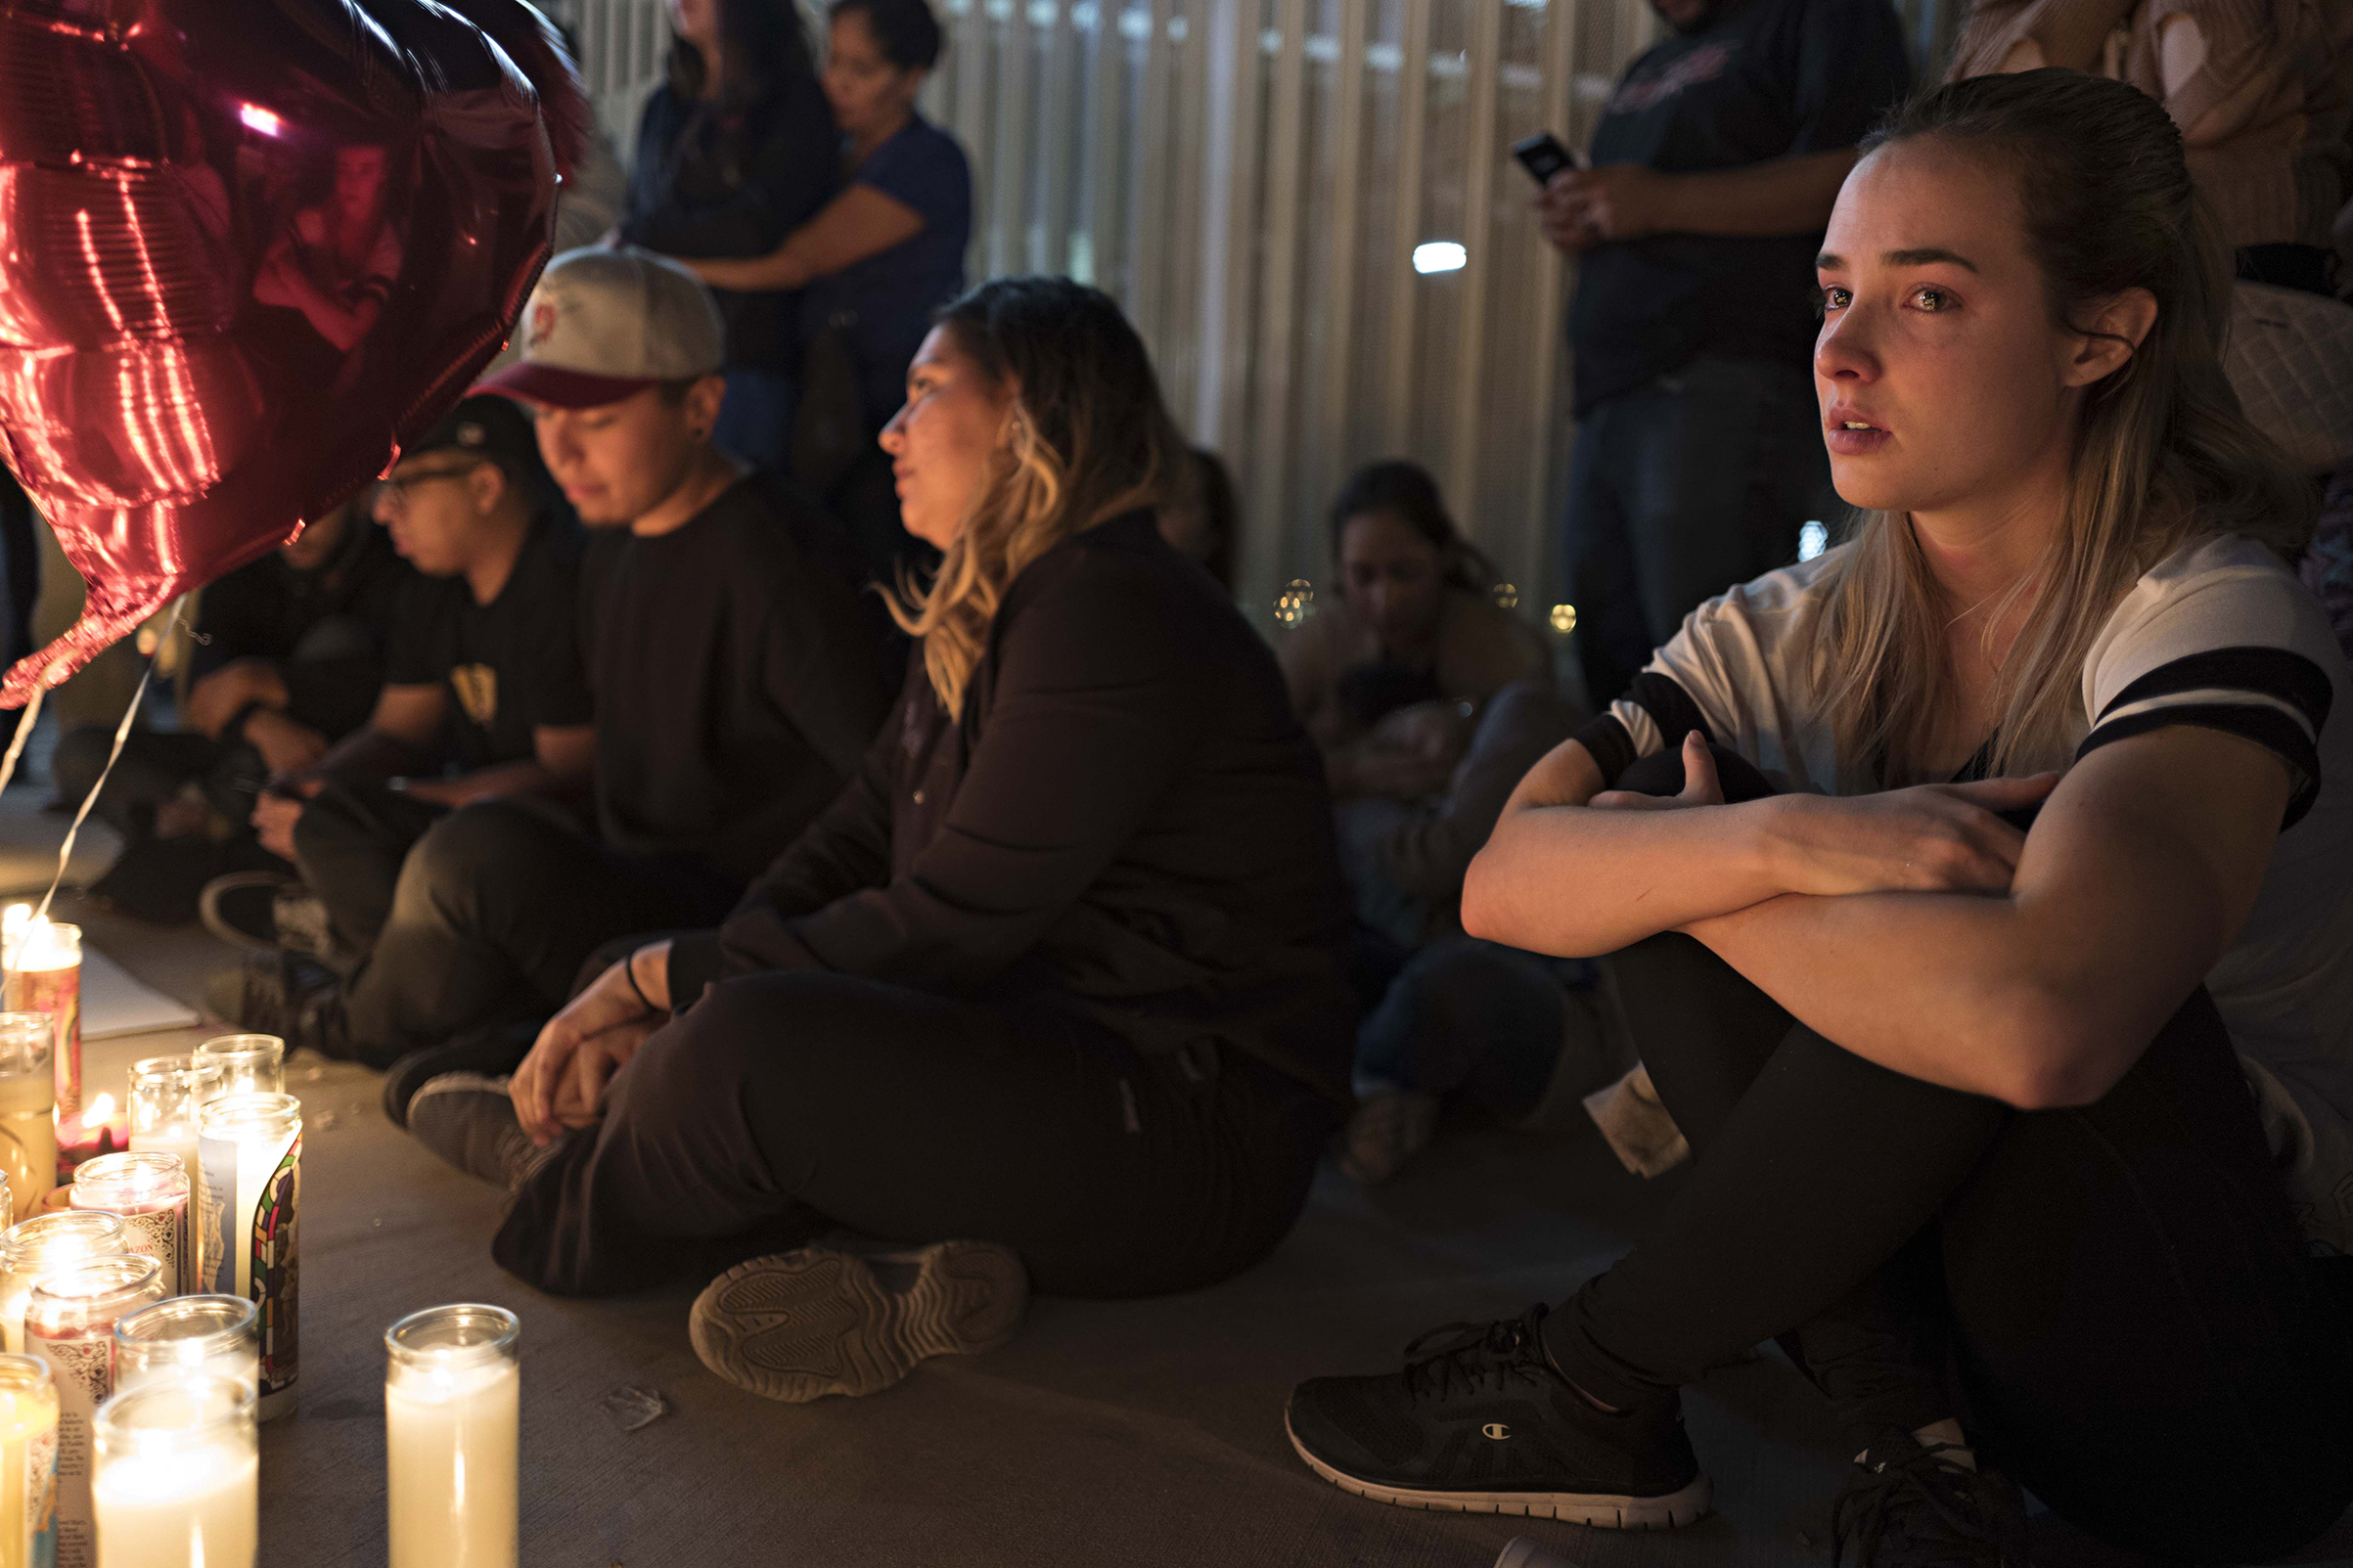 A street vigil held for victims of Sunday's mass shooting, at a main intersection on Las Vegas Boulevard on Oct. 2, 2017. (Matt Stuart—Magnum for TIME)